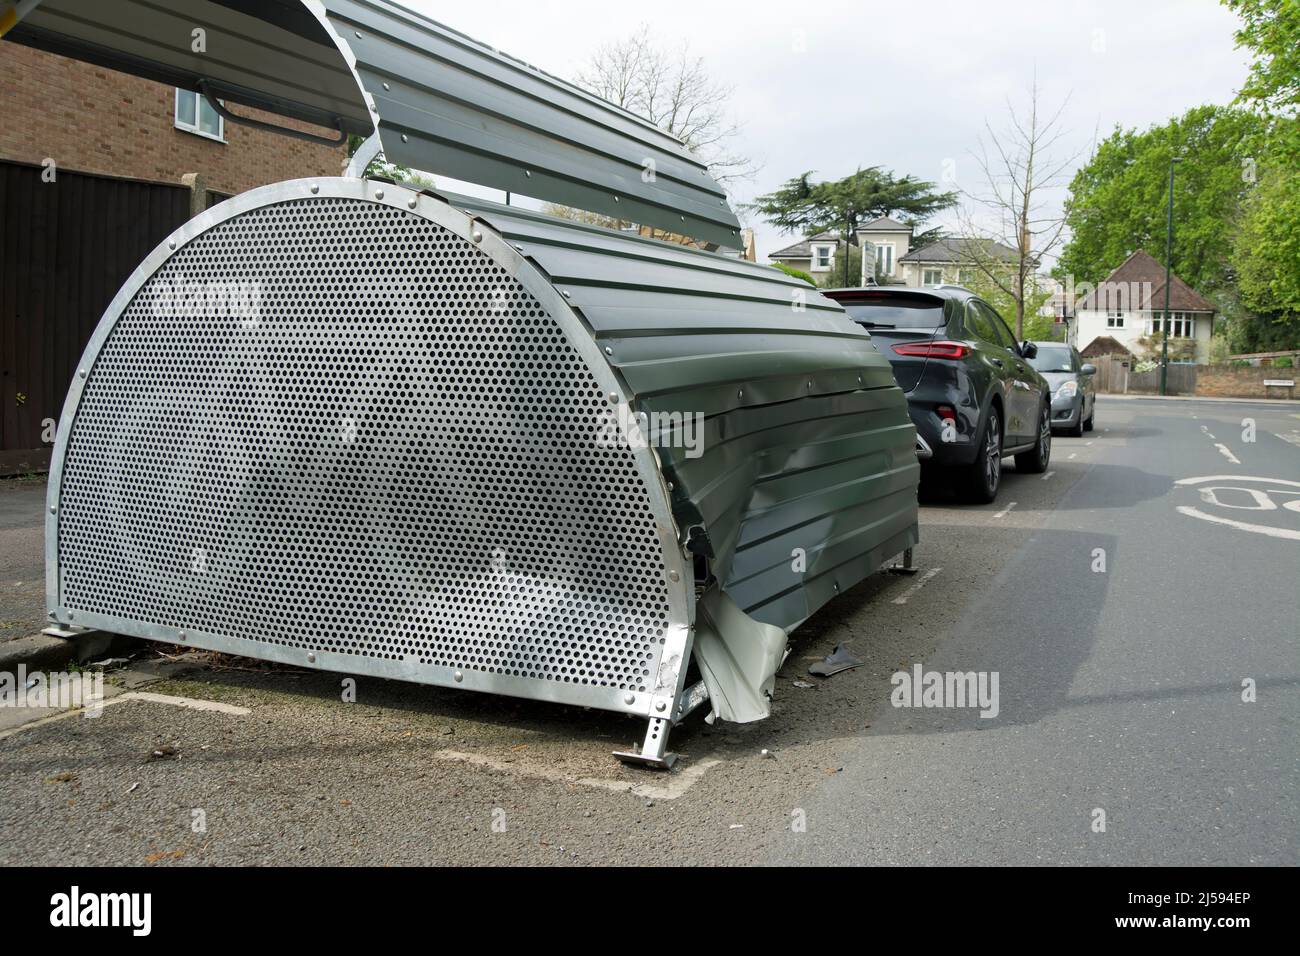 damaged cycle hanger in teddington, middlesex, england, presumably following a motor vehicle collision Stock Photo